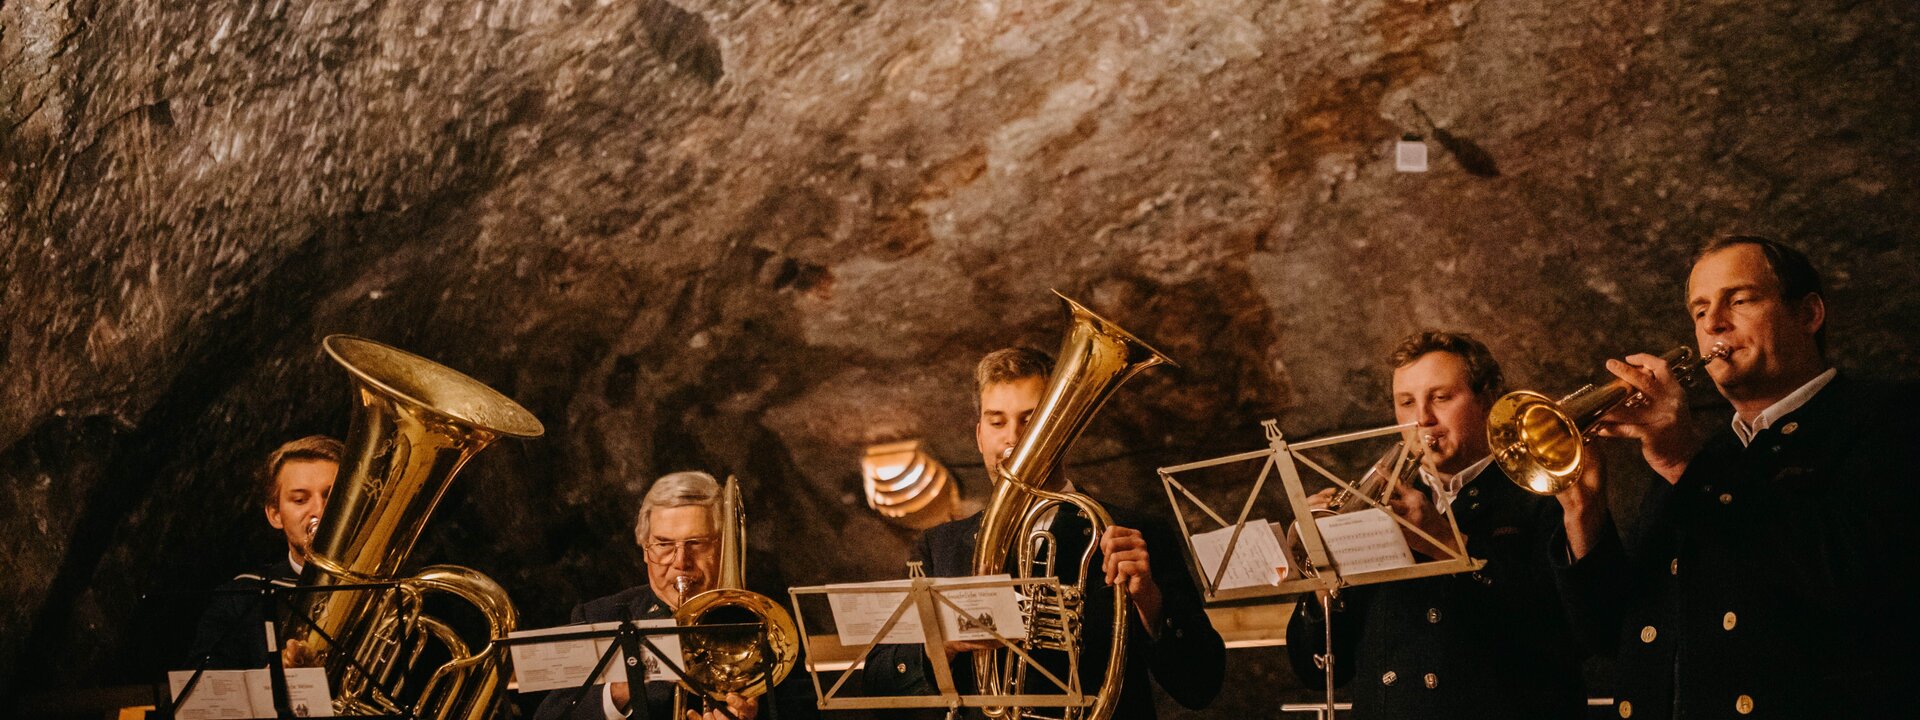 Musicians on the day of Advent underground